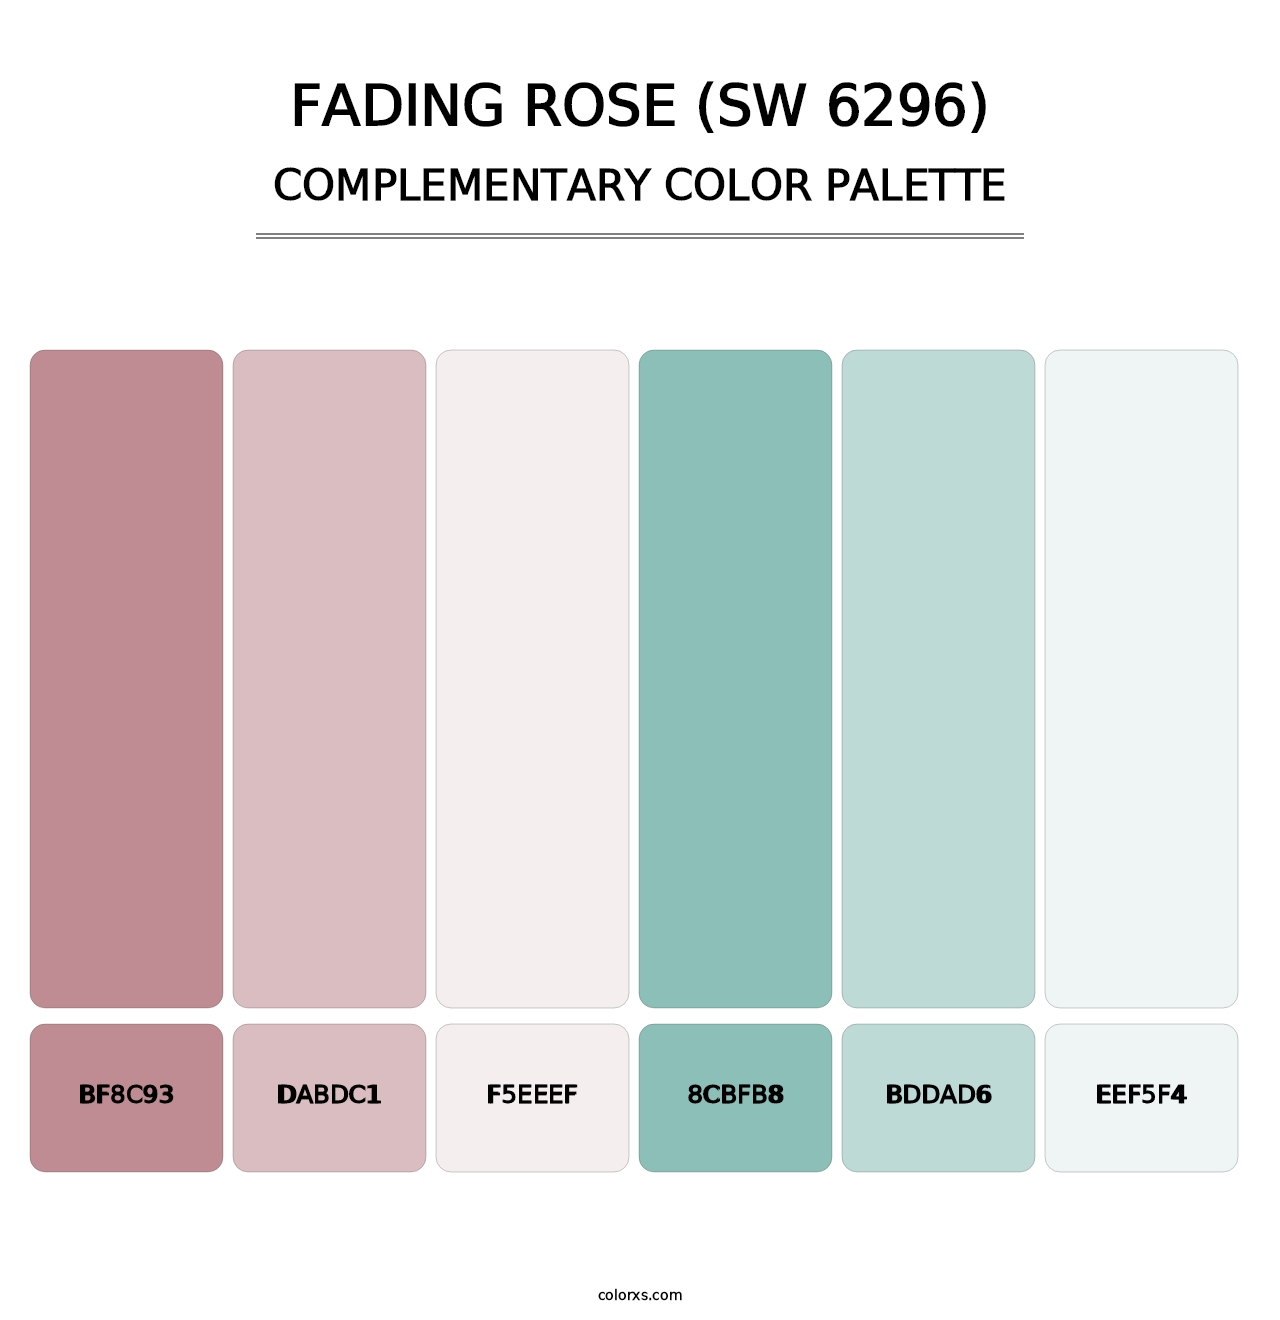 Fading Rose (SW 6296) - Complementary Color Palette